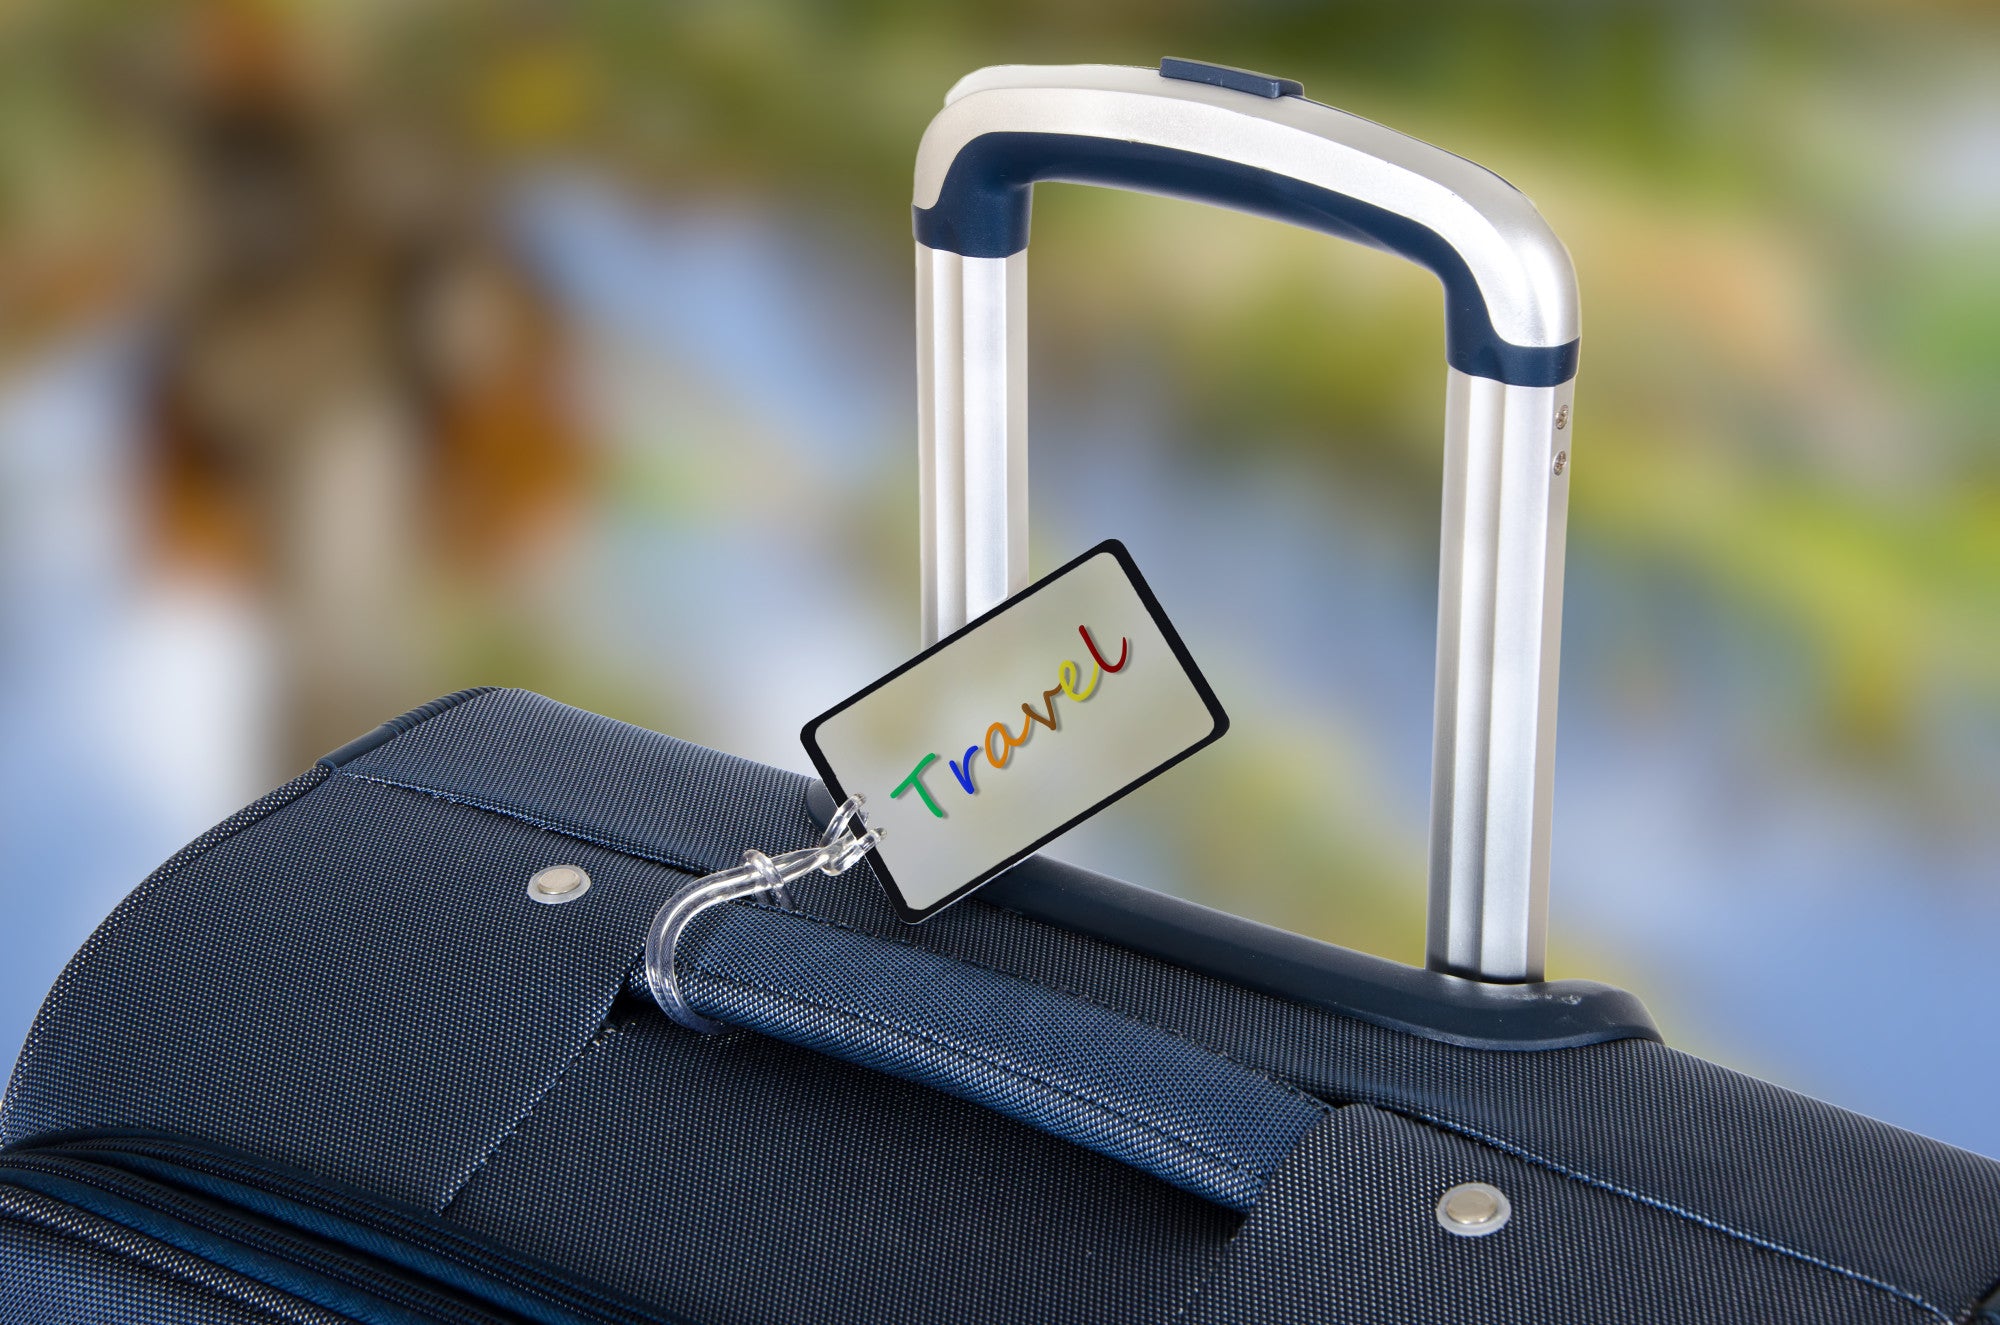 Personalized Luggage Tags Are an Essential Part of Any Family Vacation